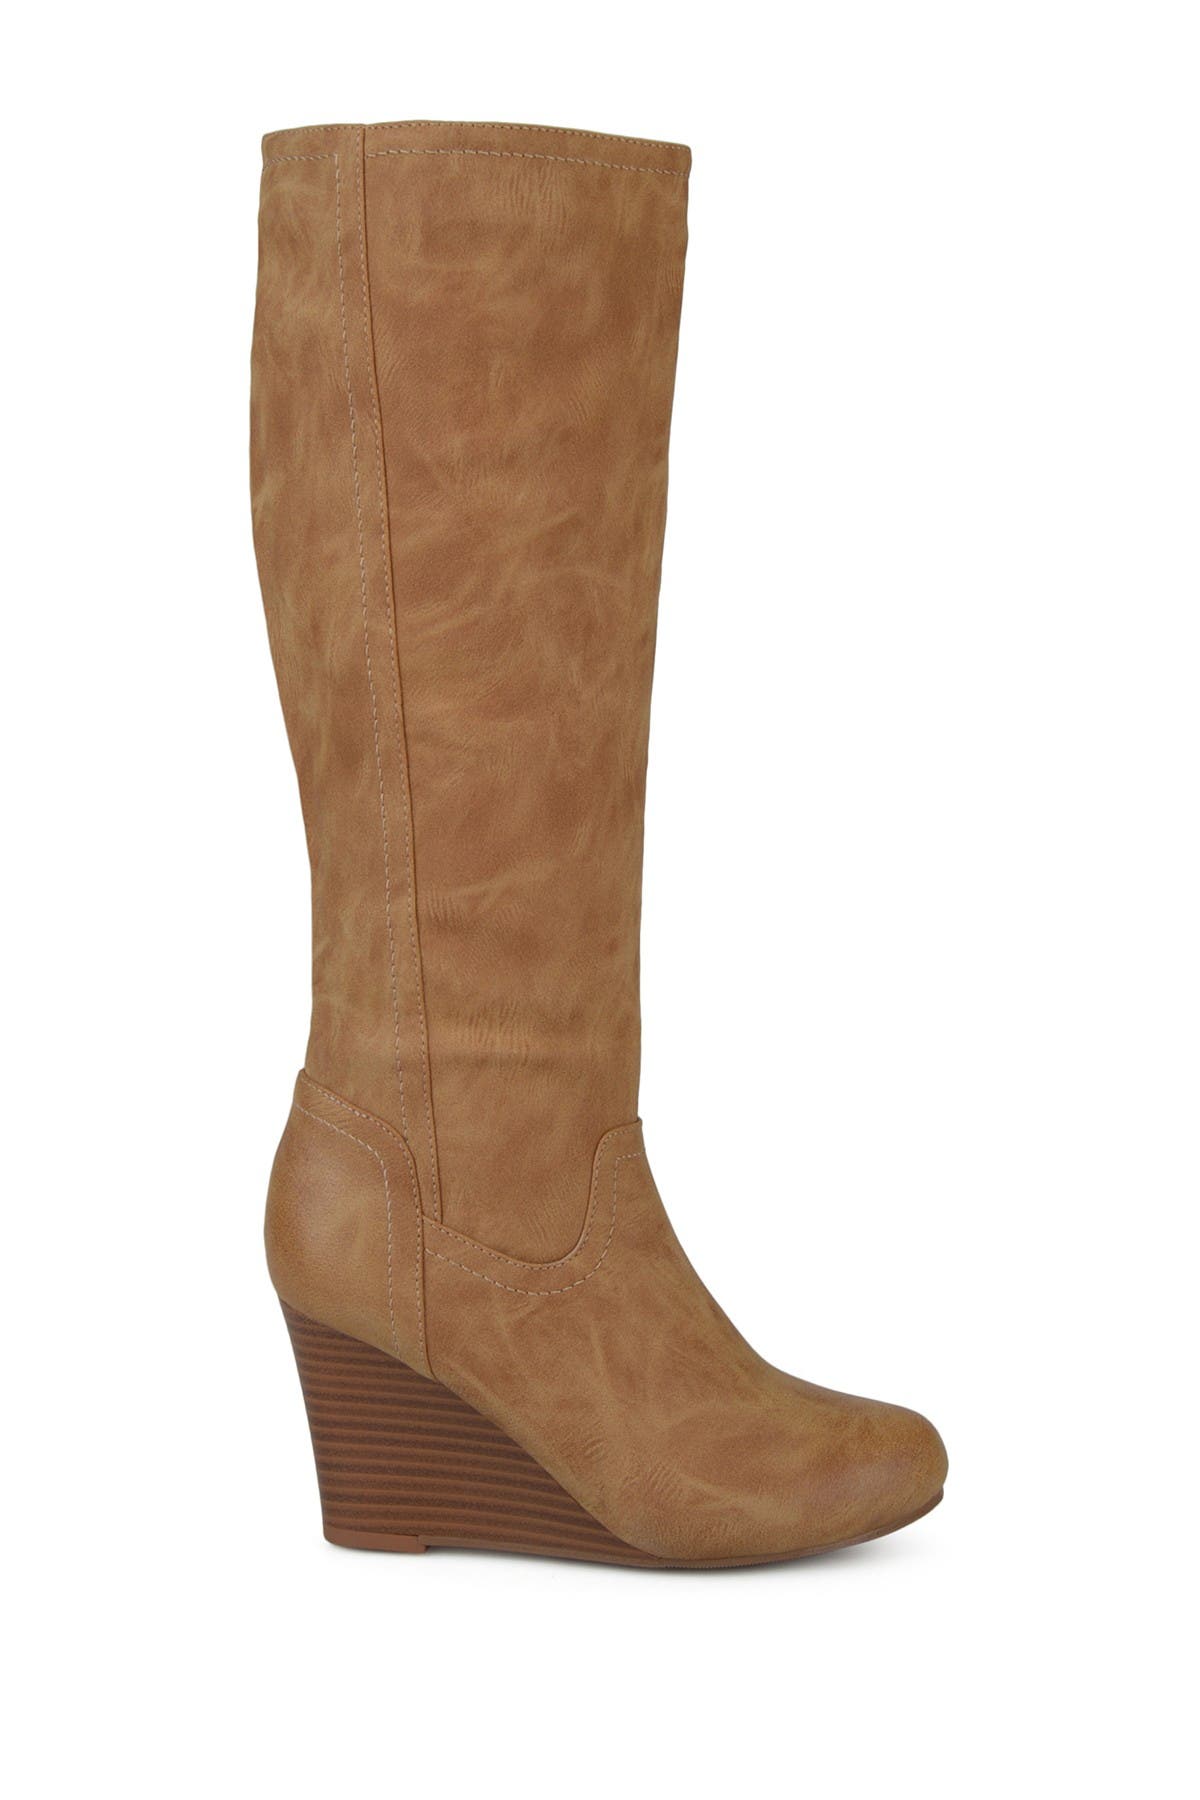 Journee Collection Langly Wedge Heel Tall Boot In Medium Brown5